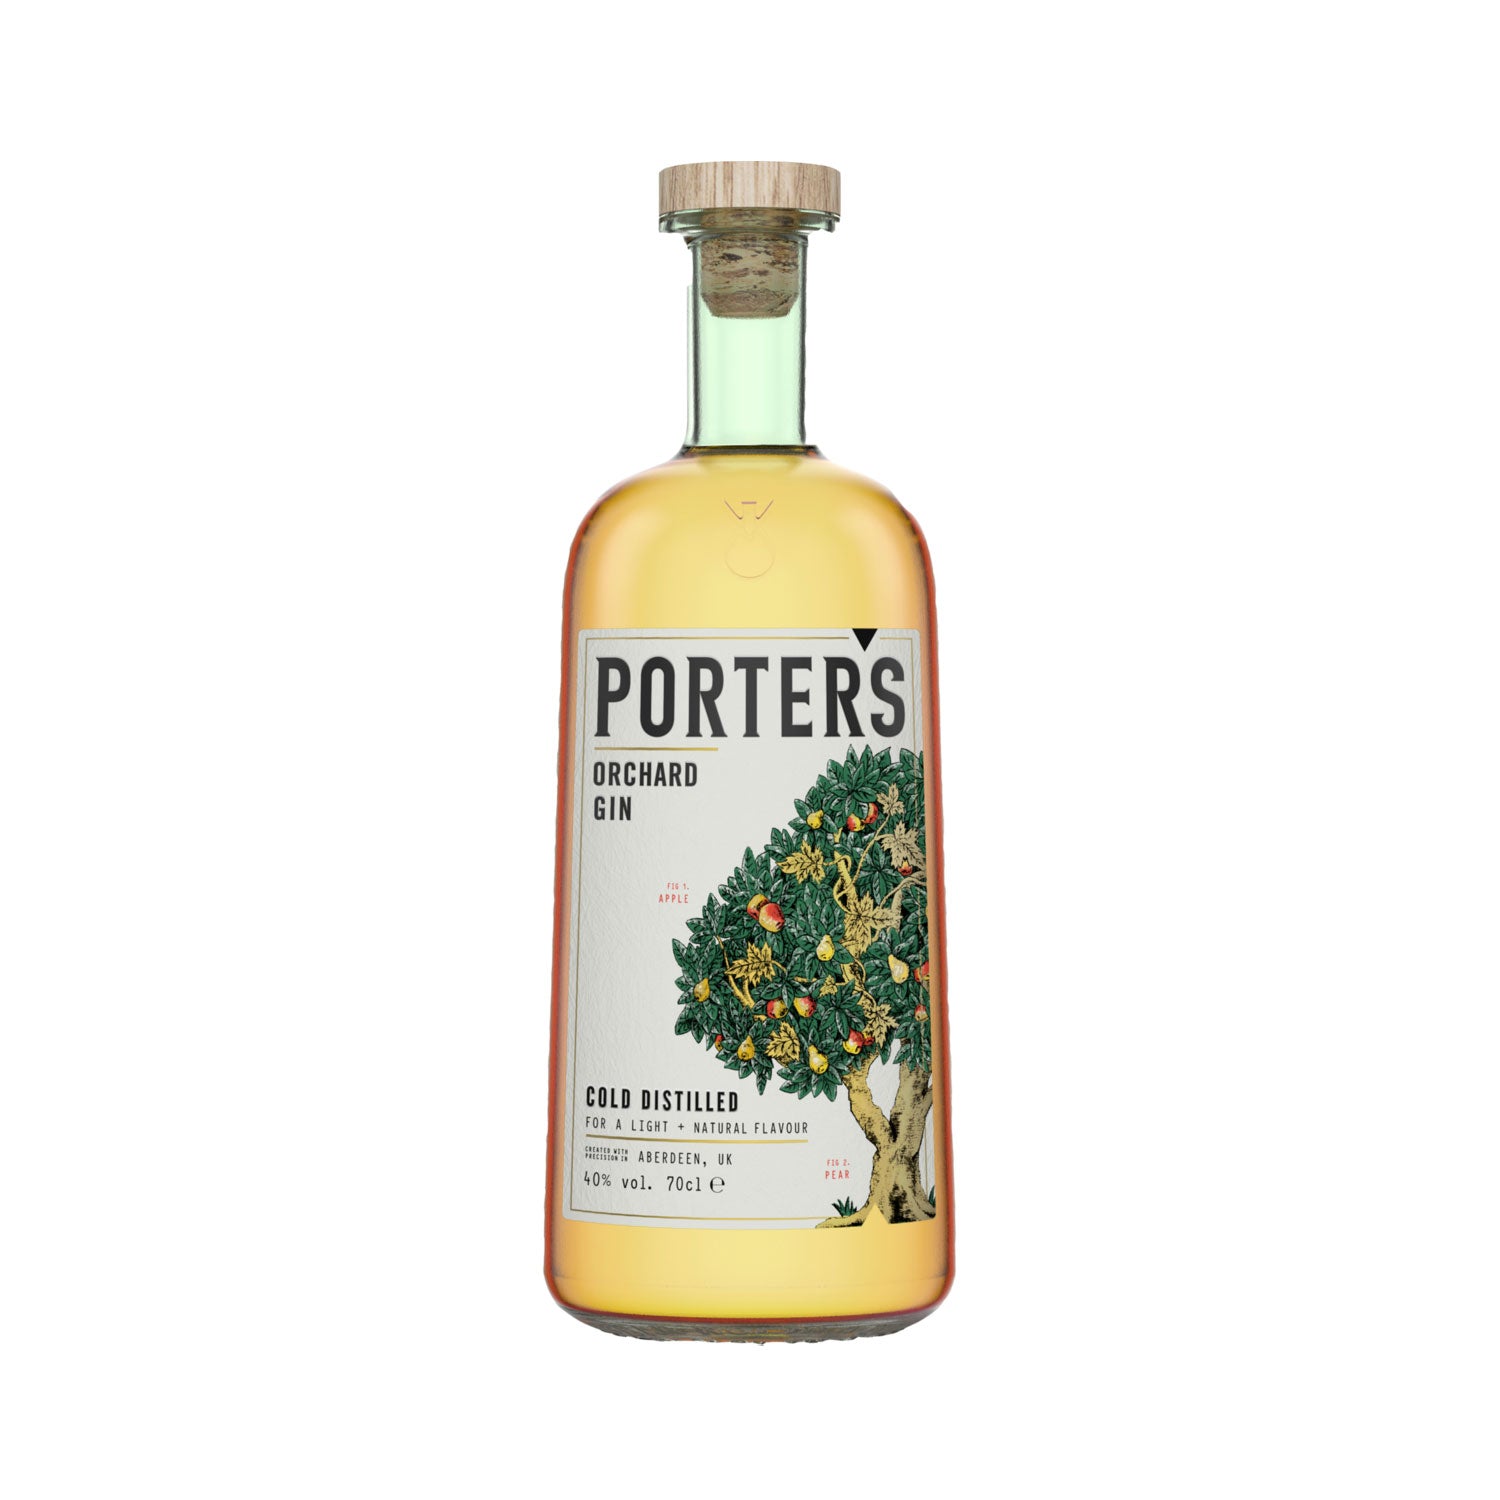 Porters Orchard Gin 700ml